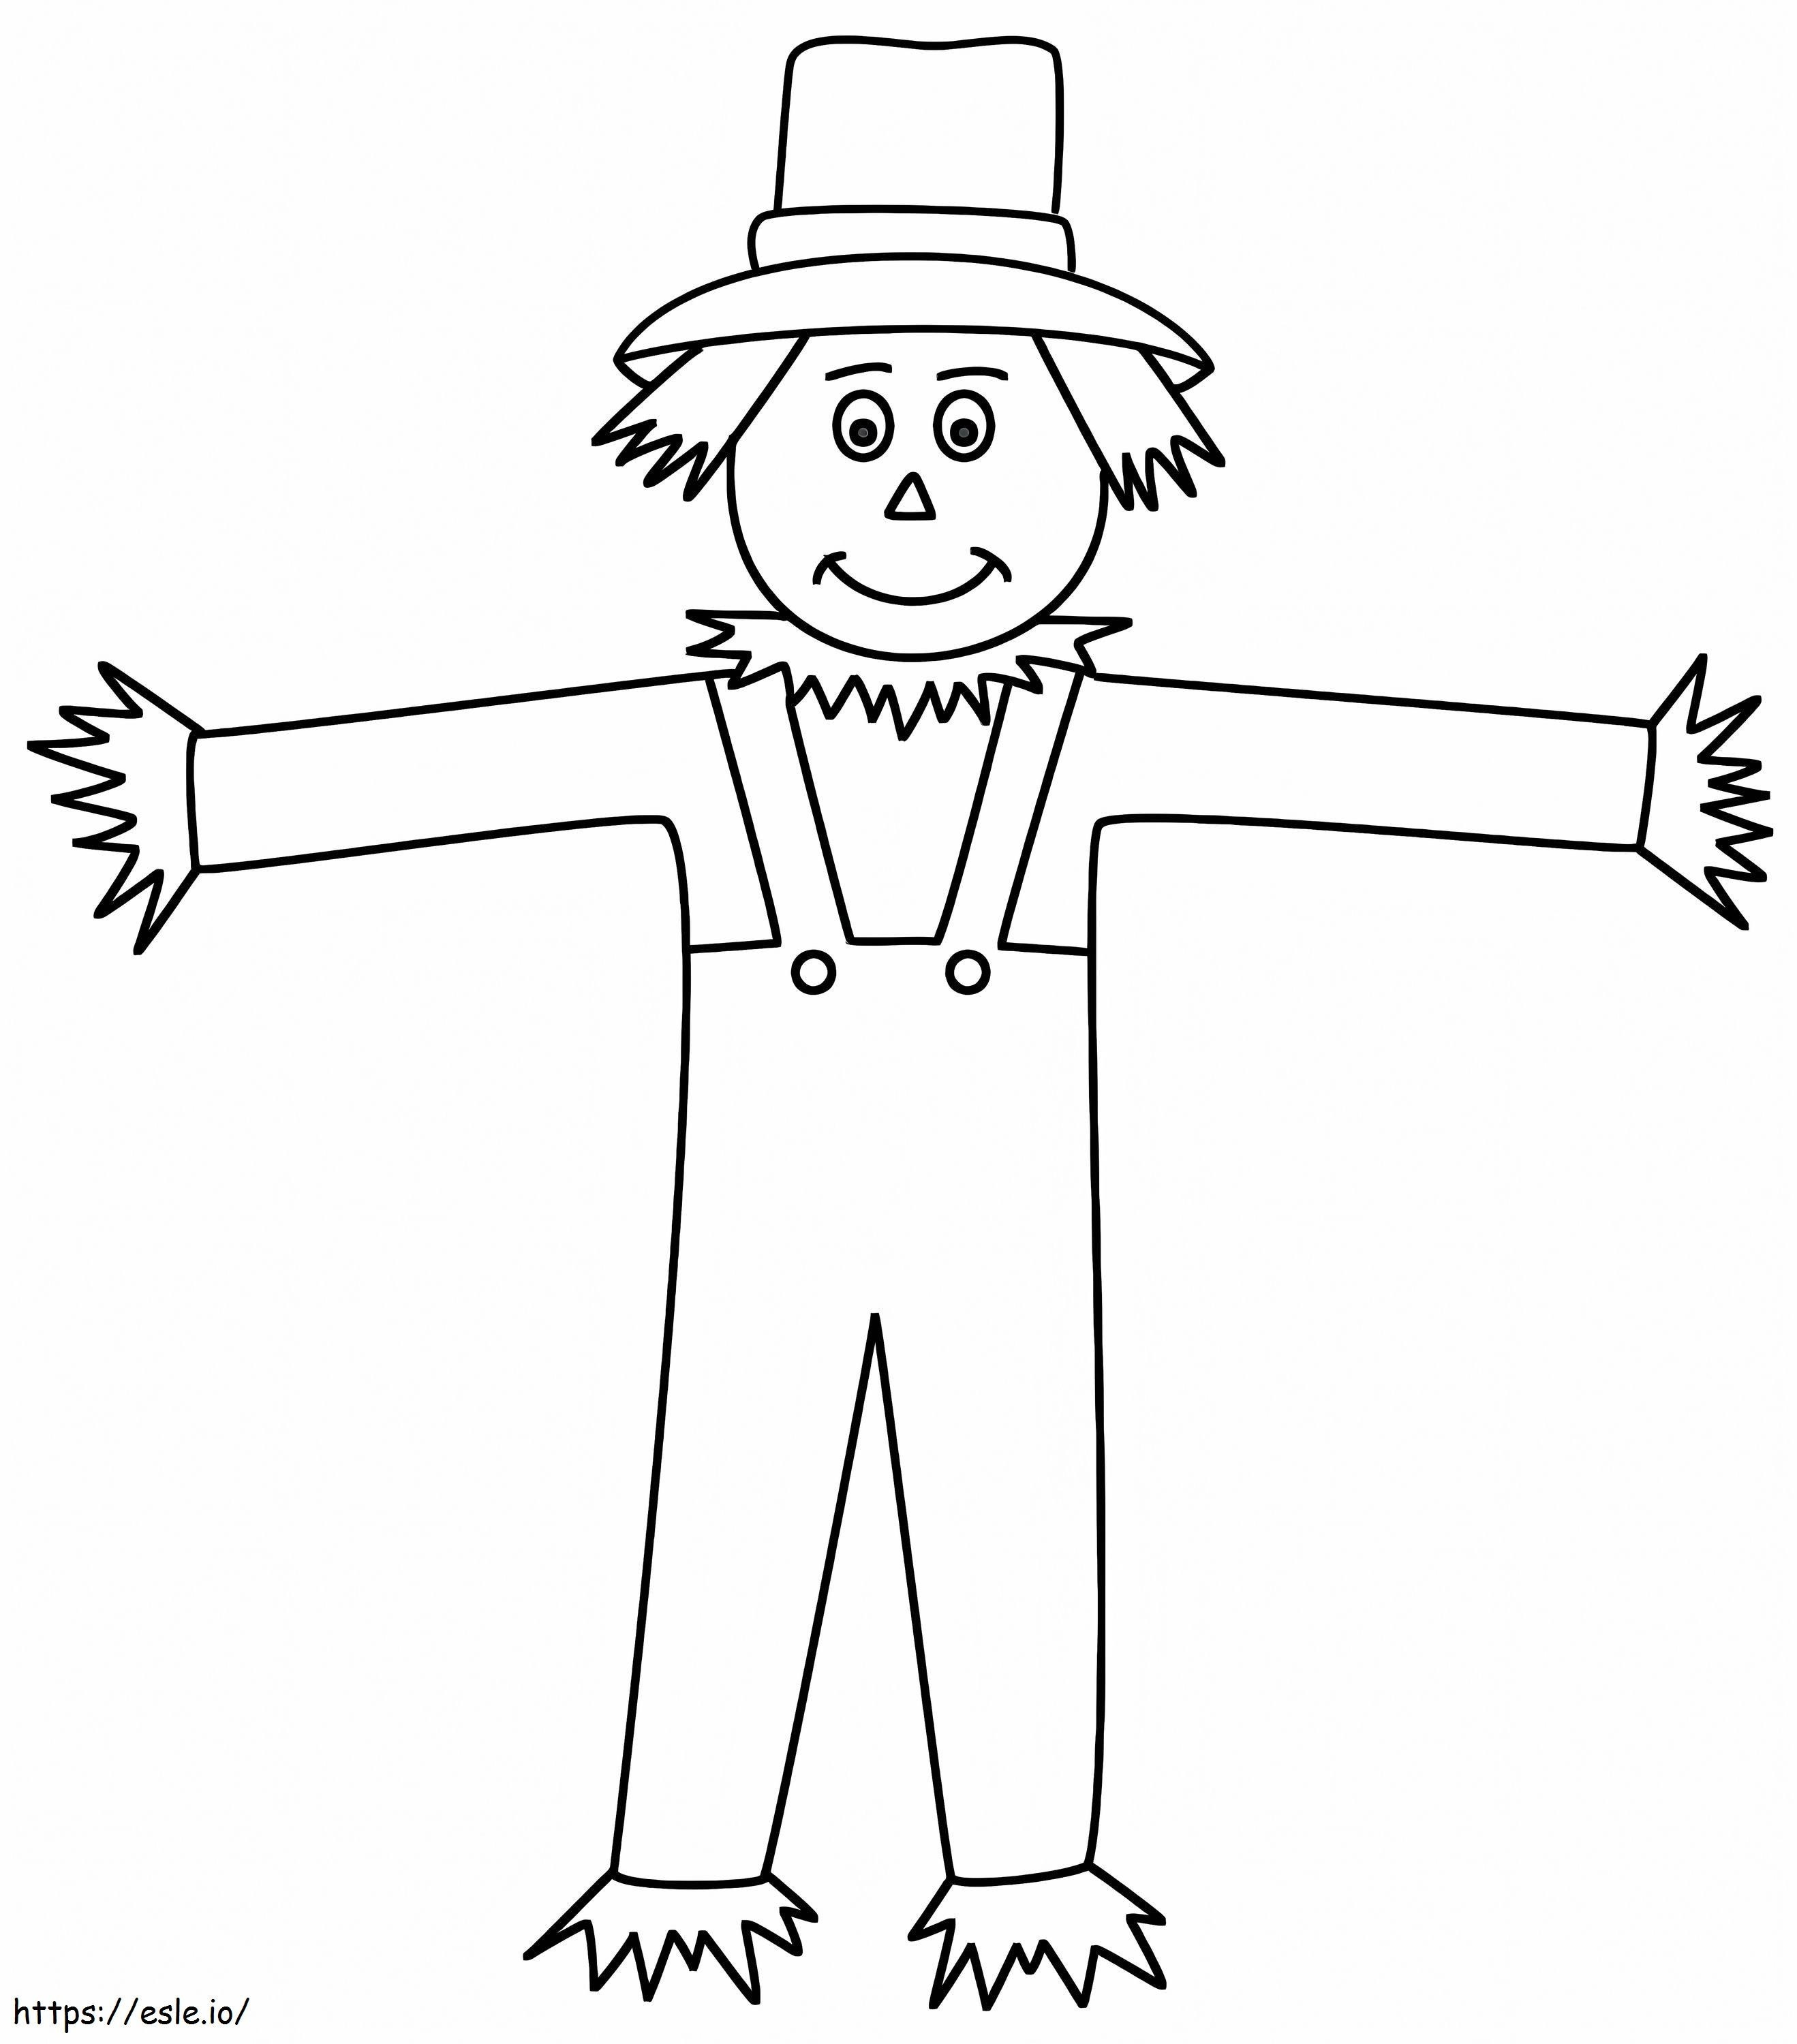 Scarecrow Smiling coloring page